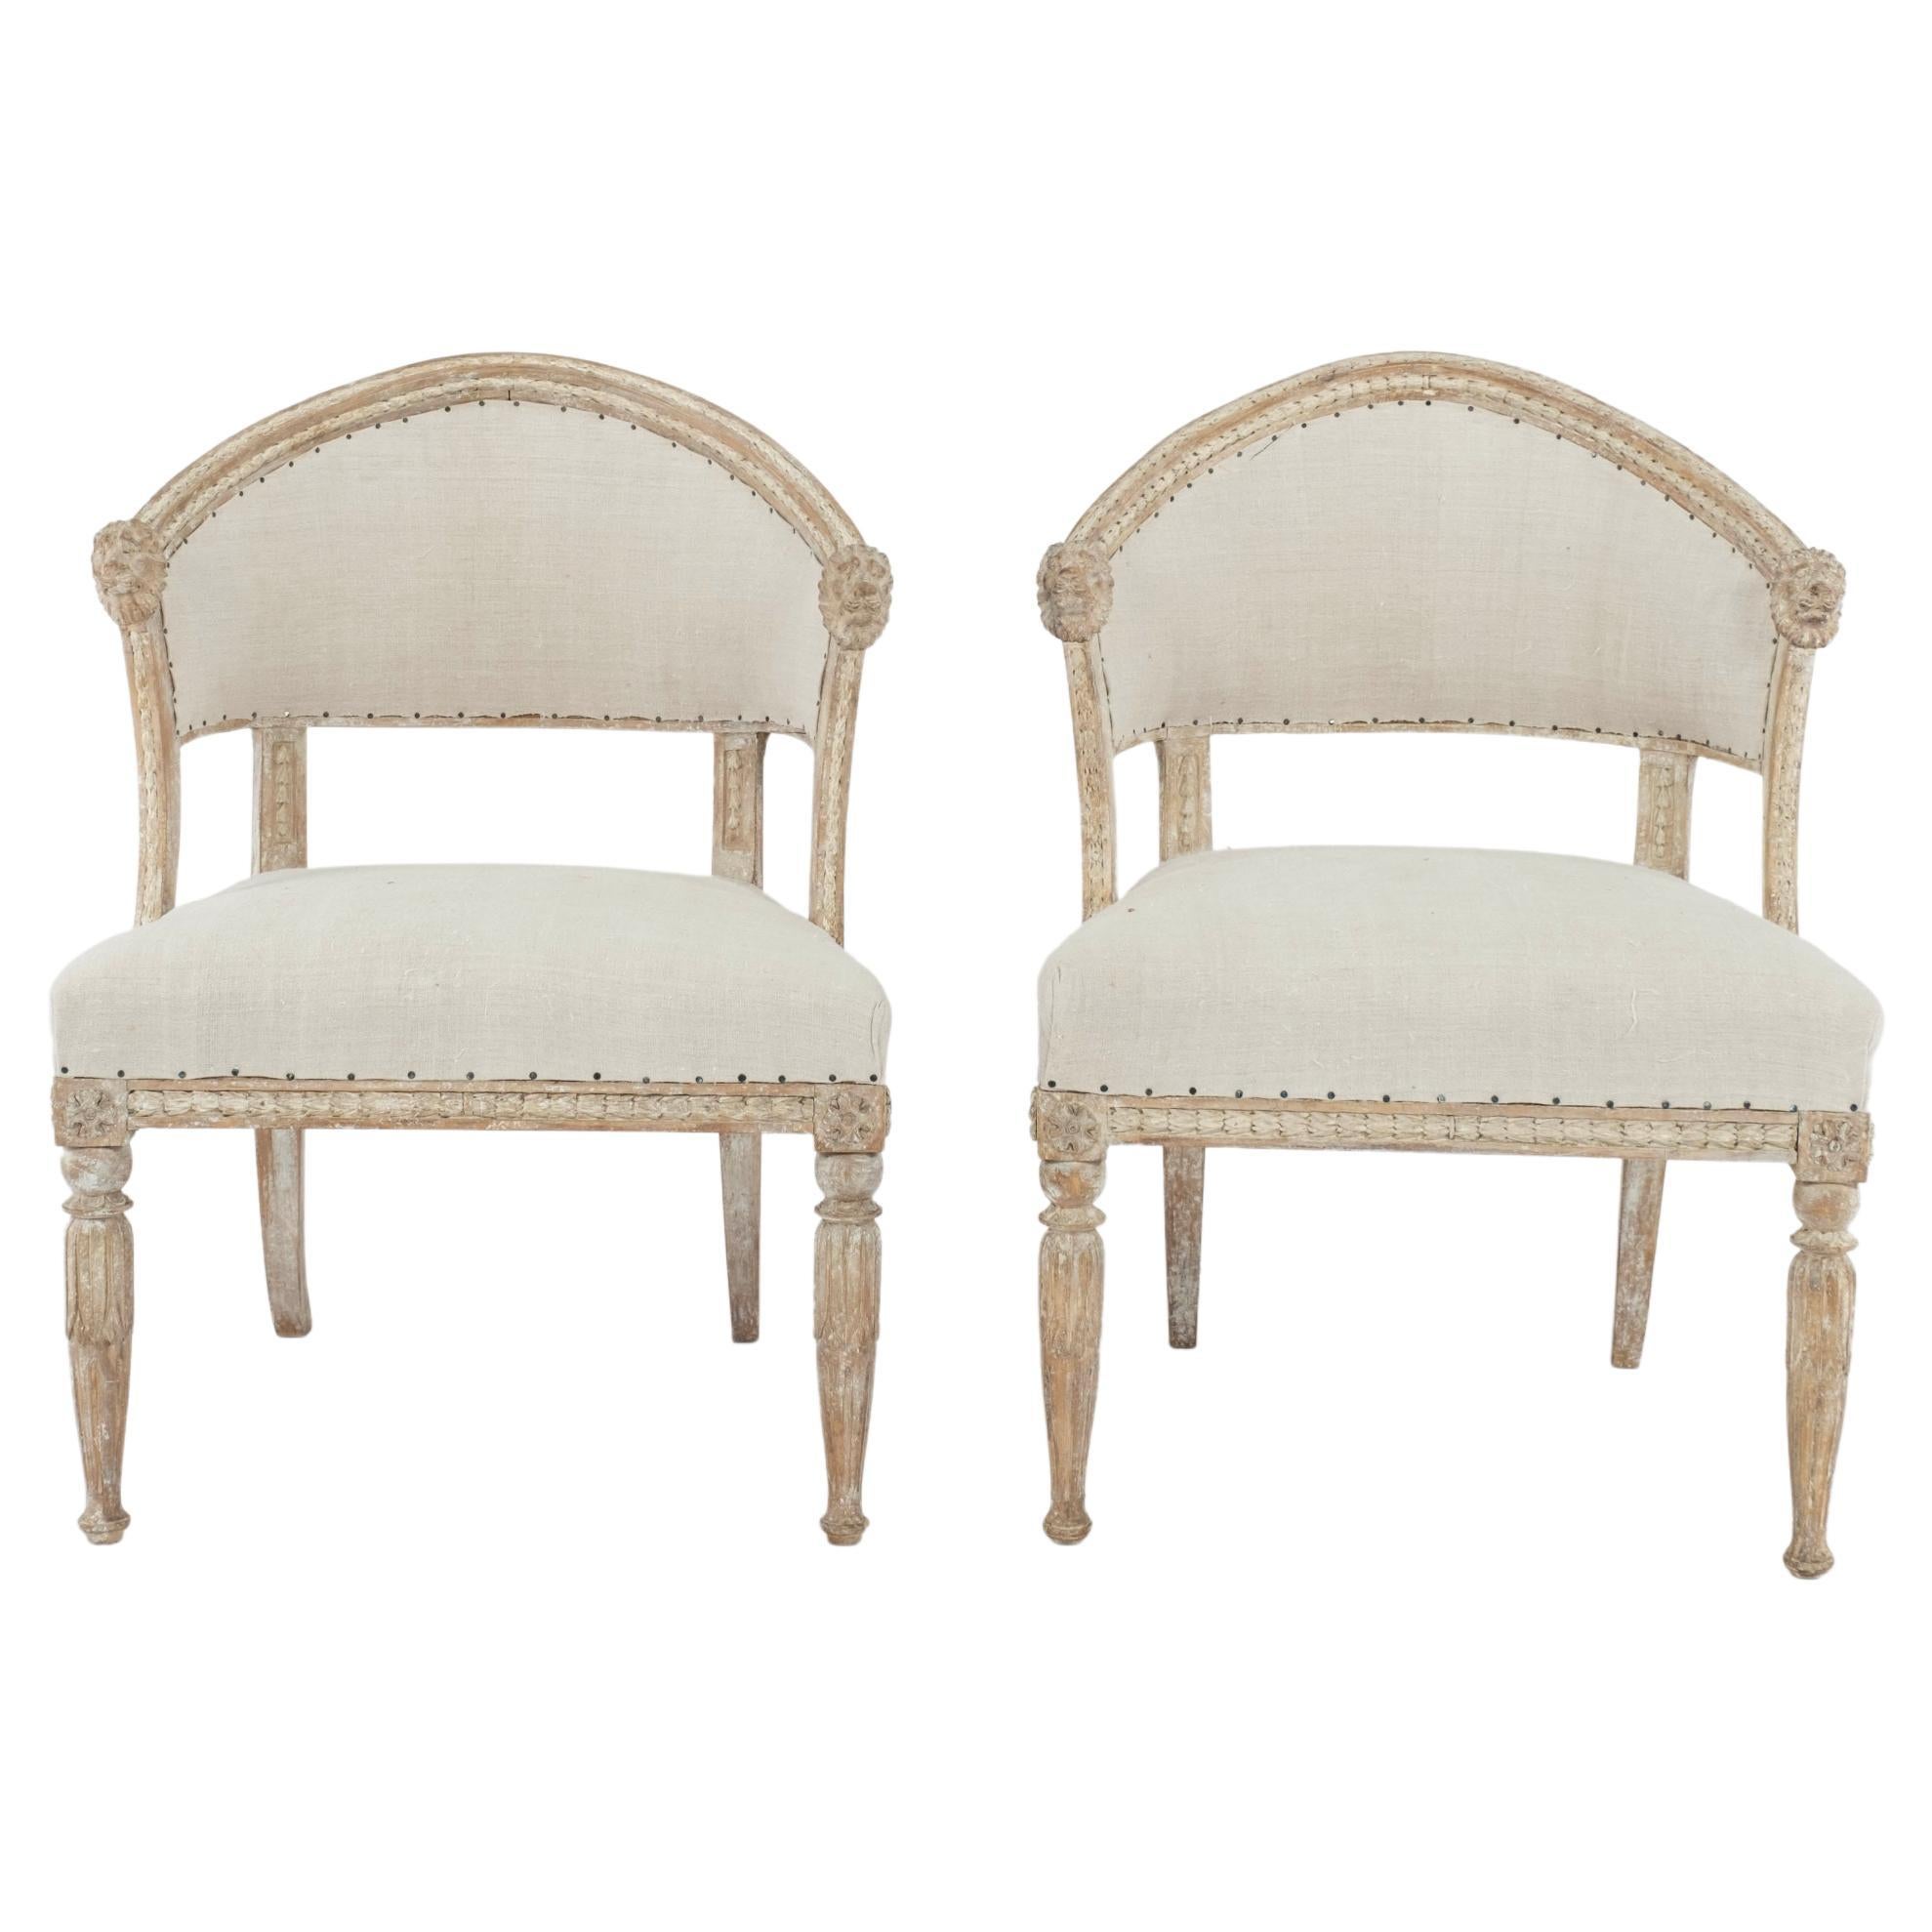 Pair of 19th C. Swedish Gustavian Barrel Back Chairs For Sale